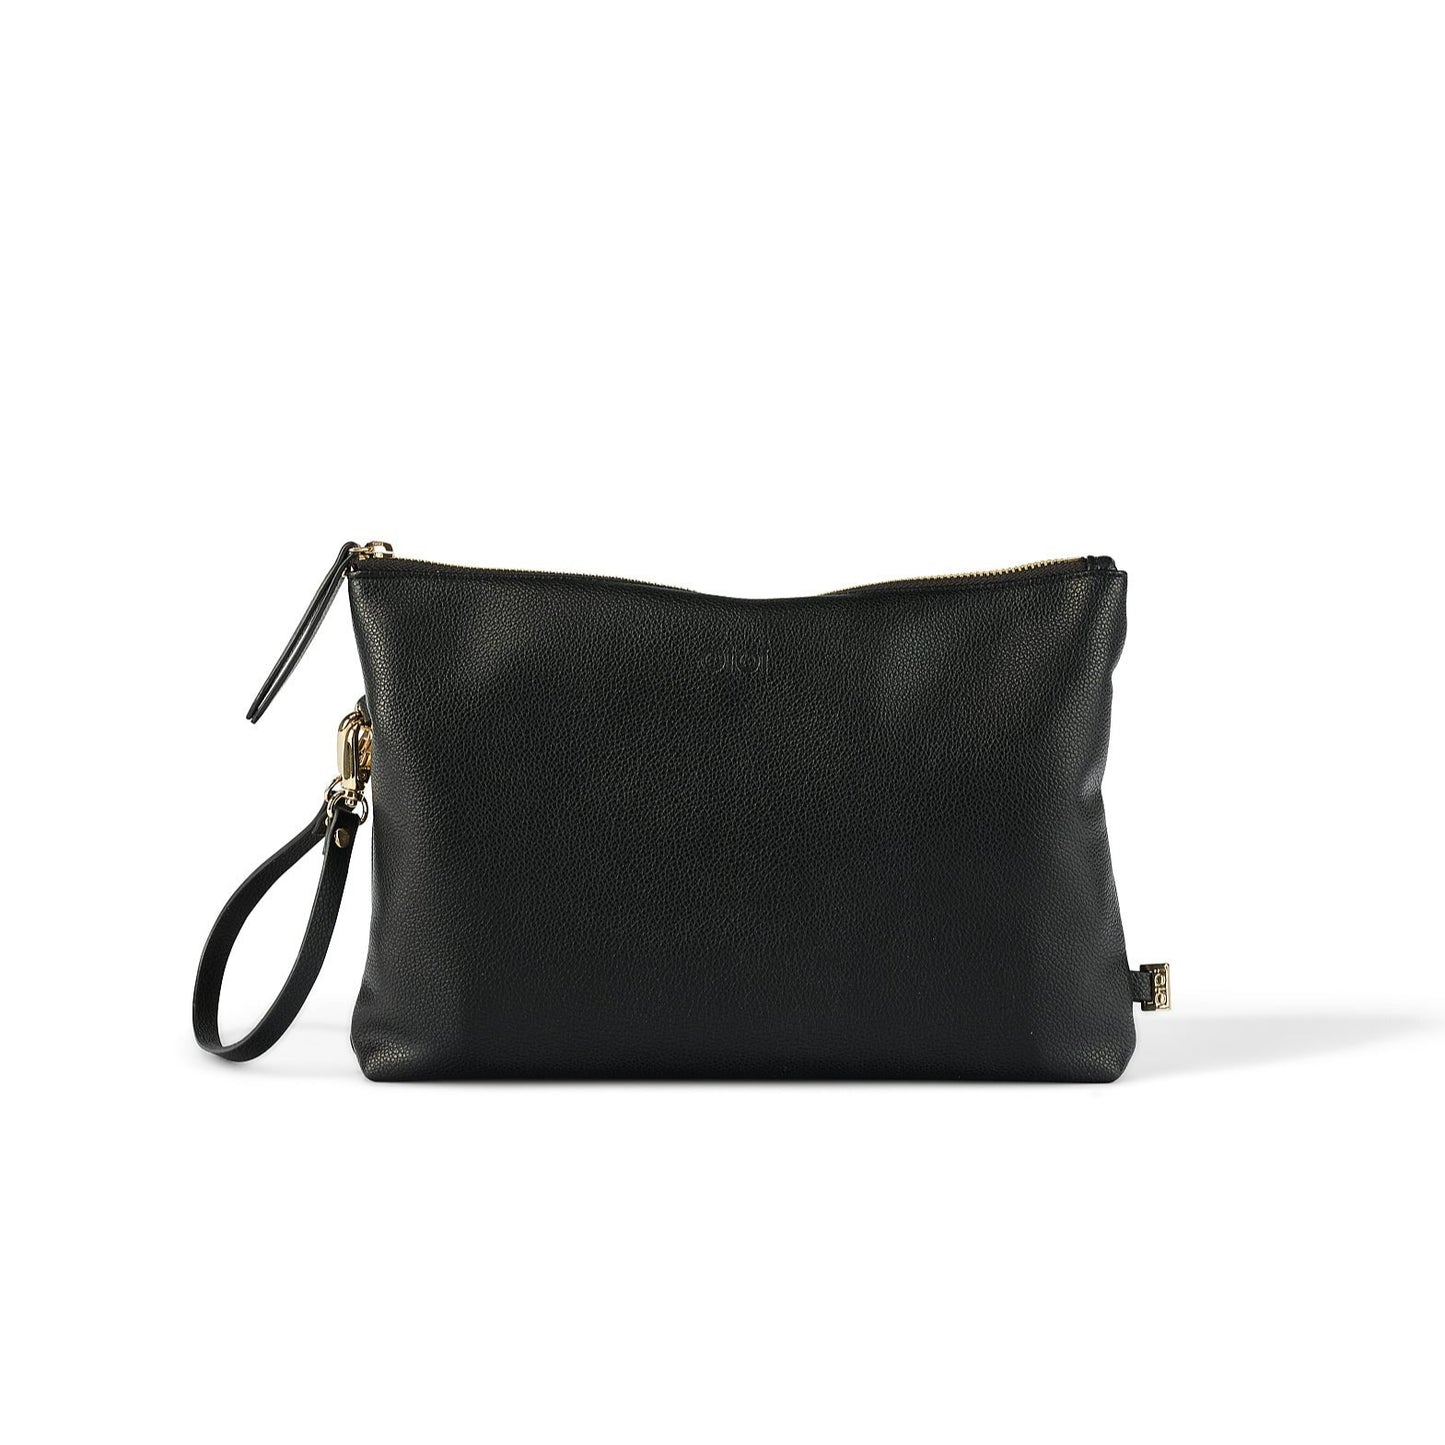 Diaper Changing Pouch - Black Vegan Leather